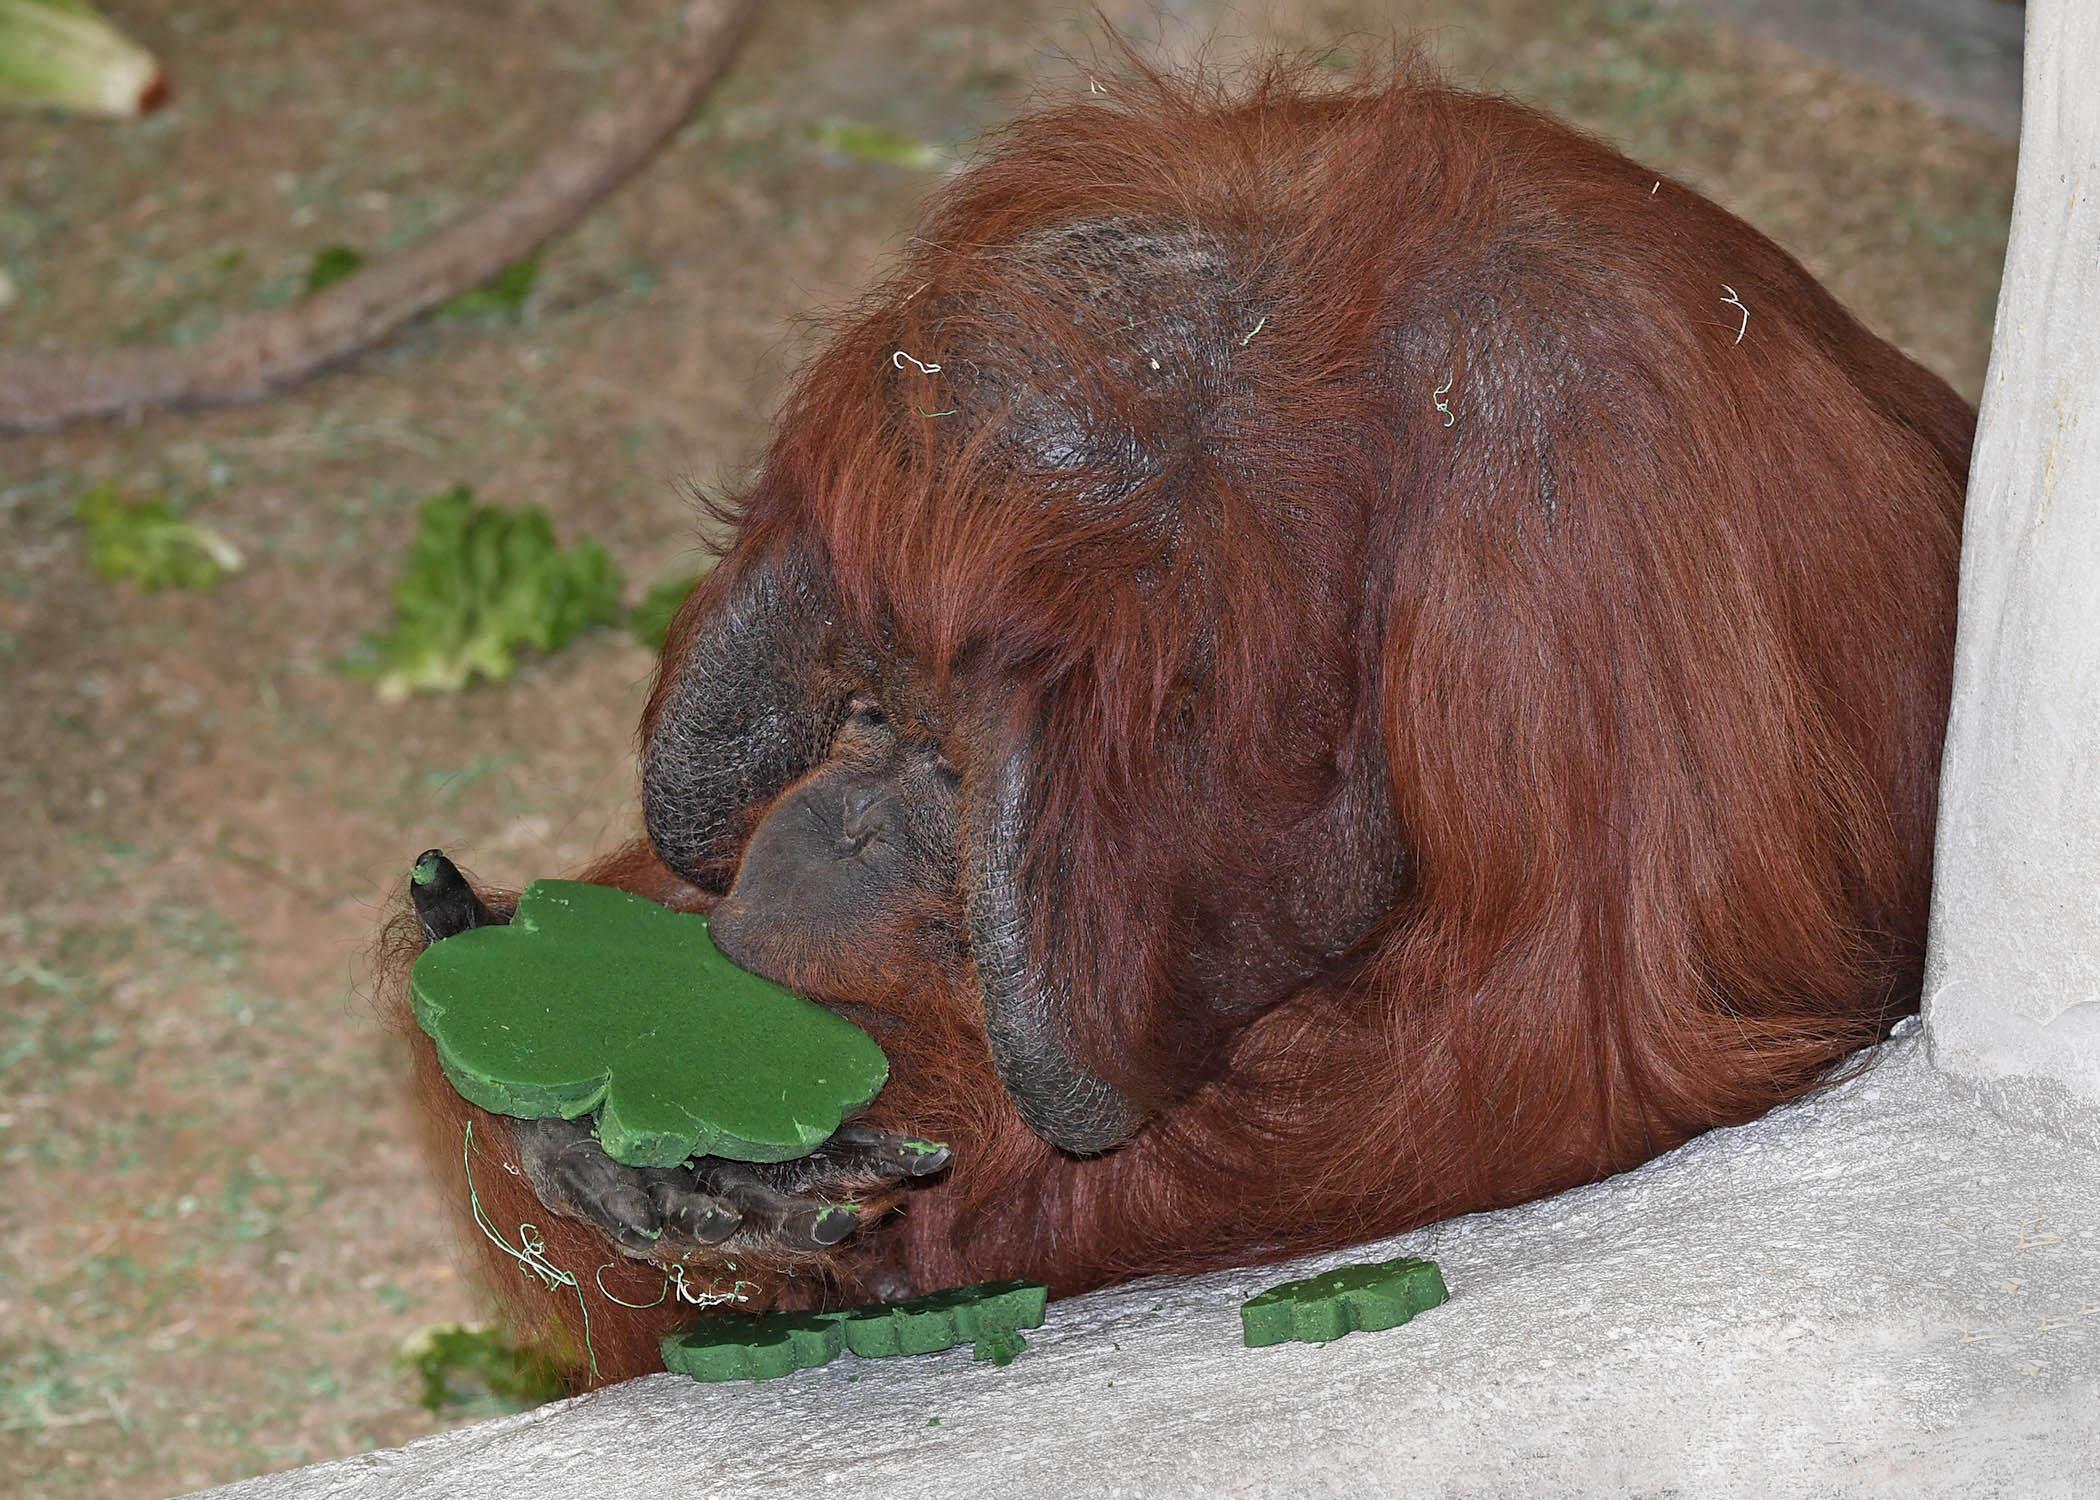 Ben, a Bornean orangutan, munches on a St. Patrick's Day treat last week at Brookfield Zoo. (Jim Schulz / Chicago Zoological Society)